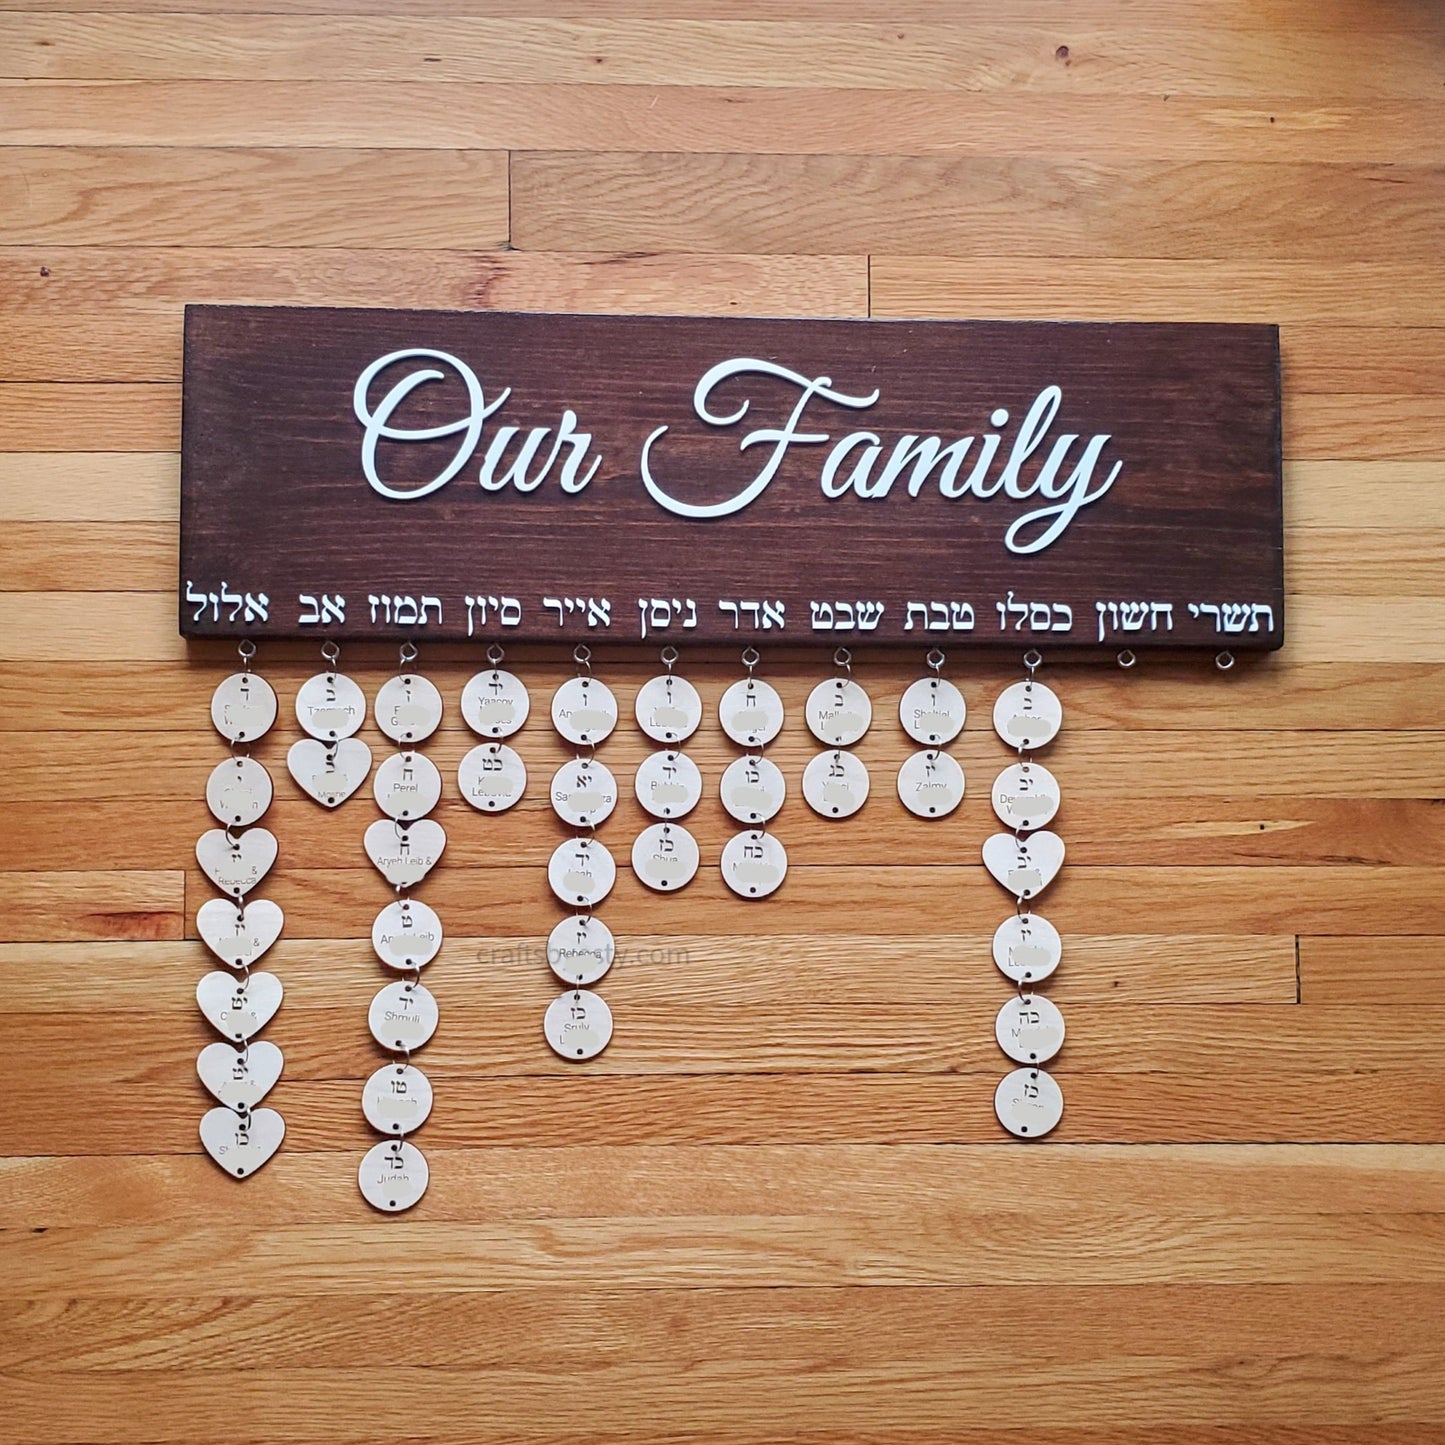 Family Occasion Board - Our Family (Font Options Available)